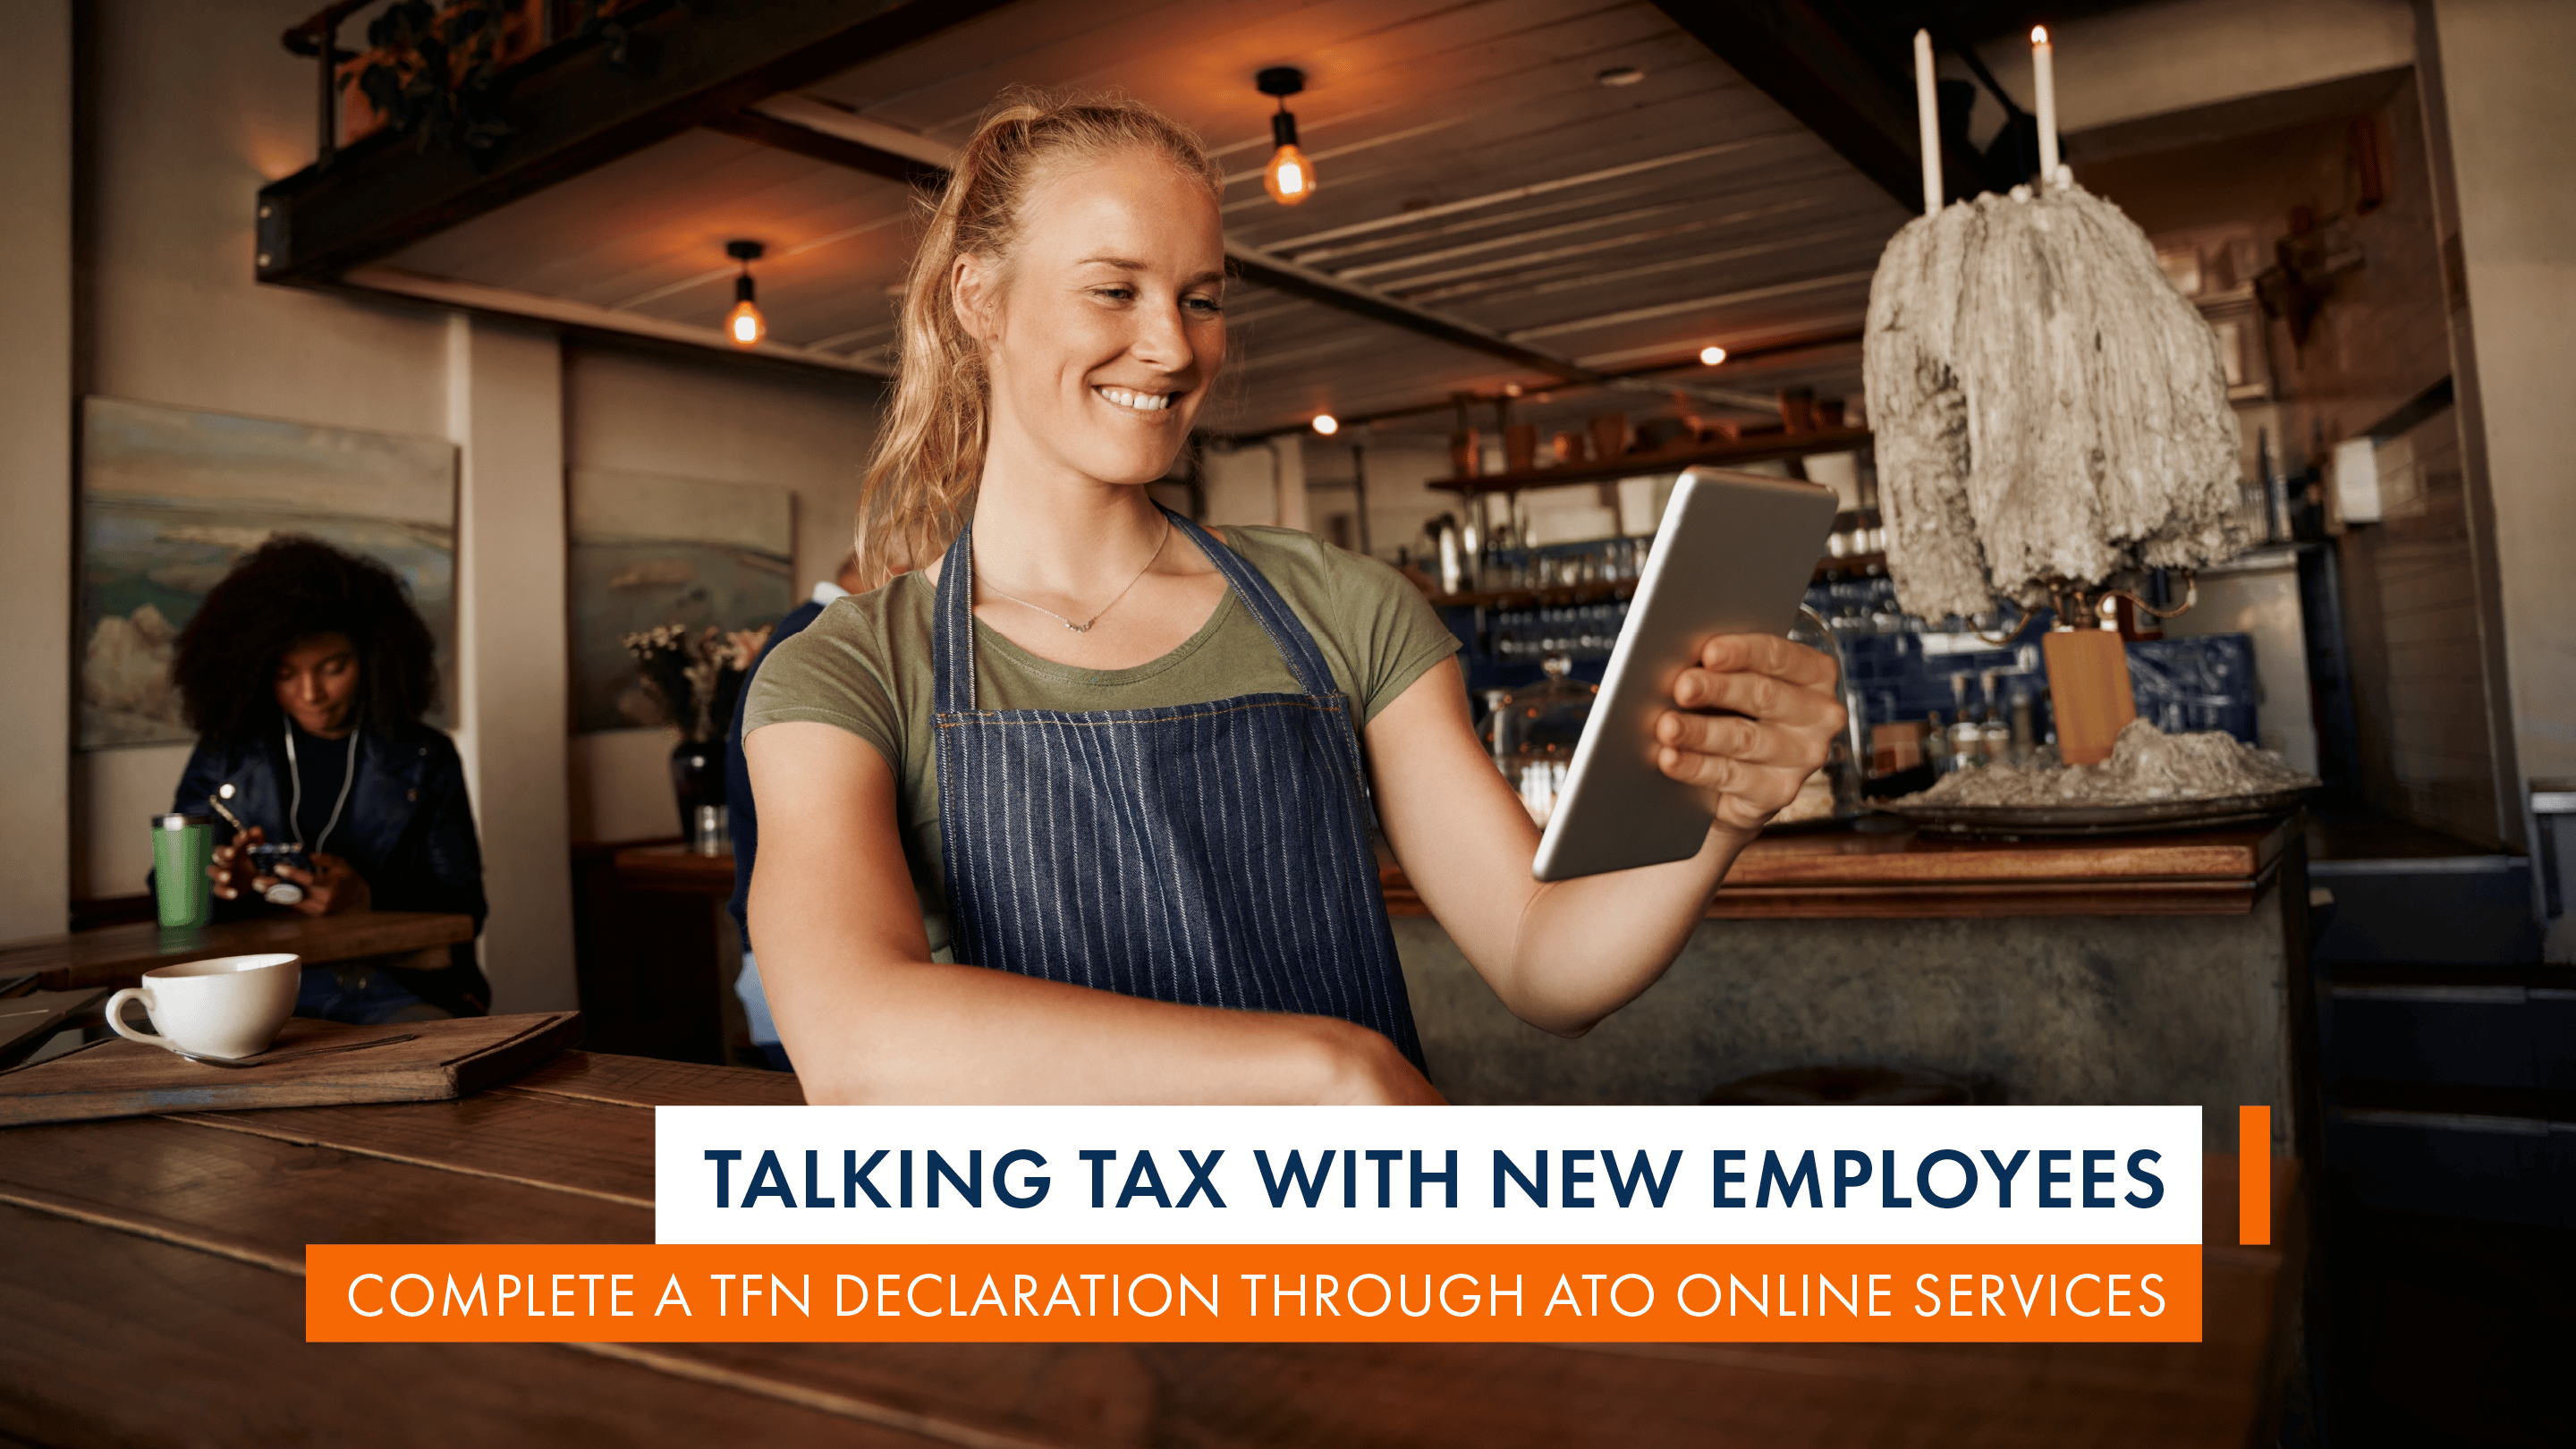 Talking tax with new employees